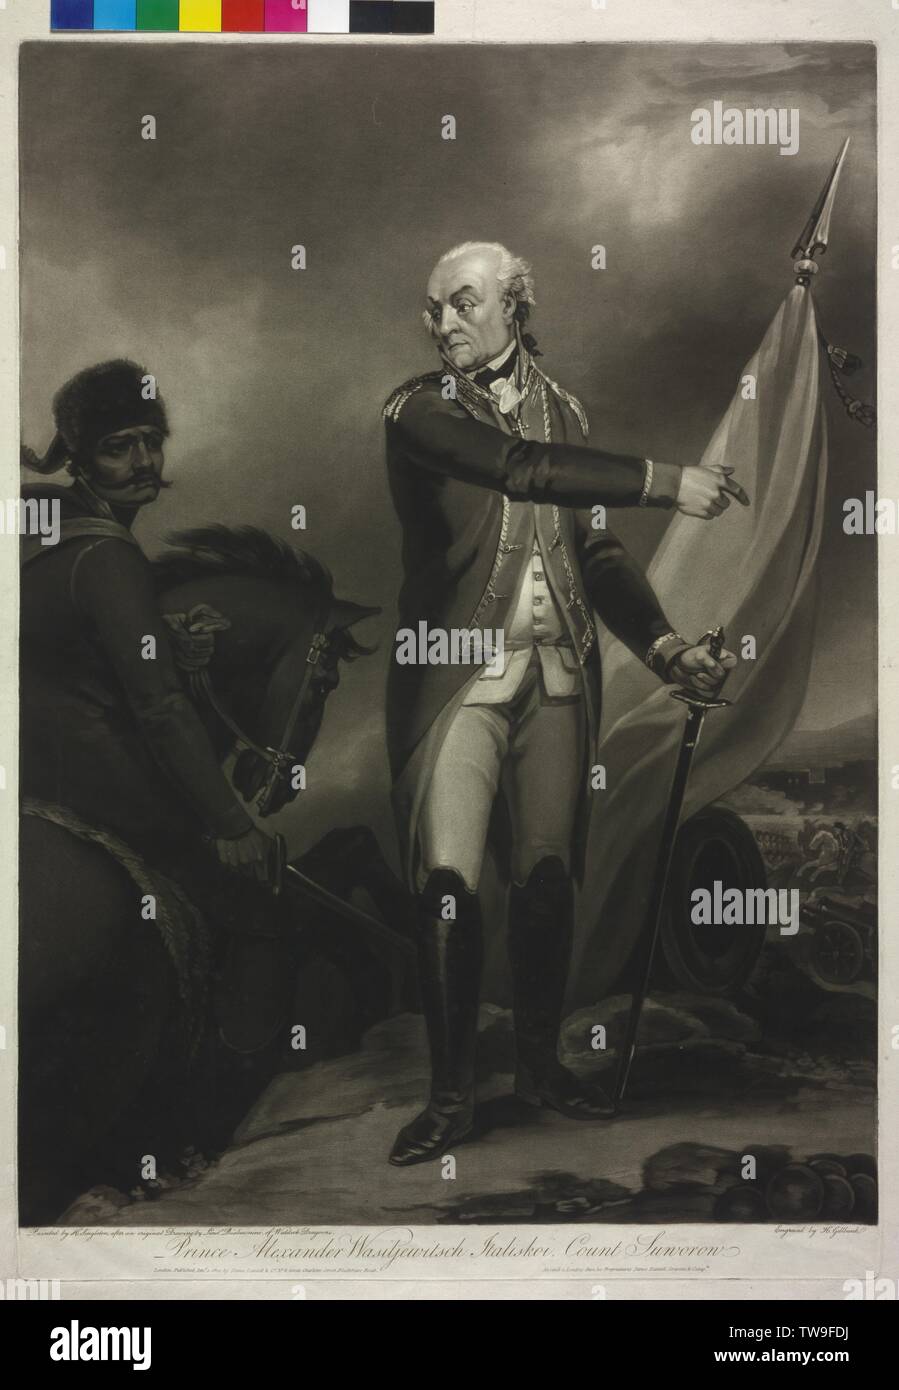 Suvorov, Vasilevic Aleksandr, painting by Henry singleton based on a drawing by Biskewnini, portrayed in a mezzotint by Haveill Gillbank, Additional-Rights-Clearance-Info-Not-Available Stock Photo